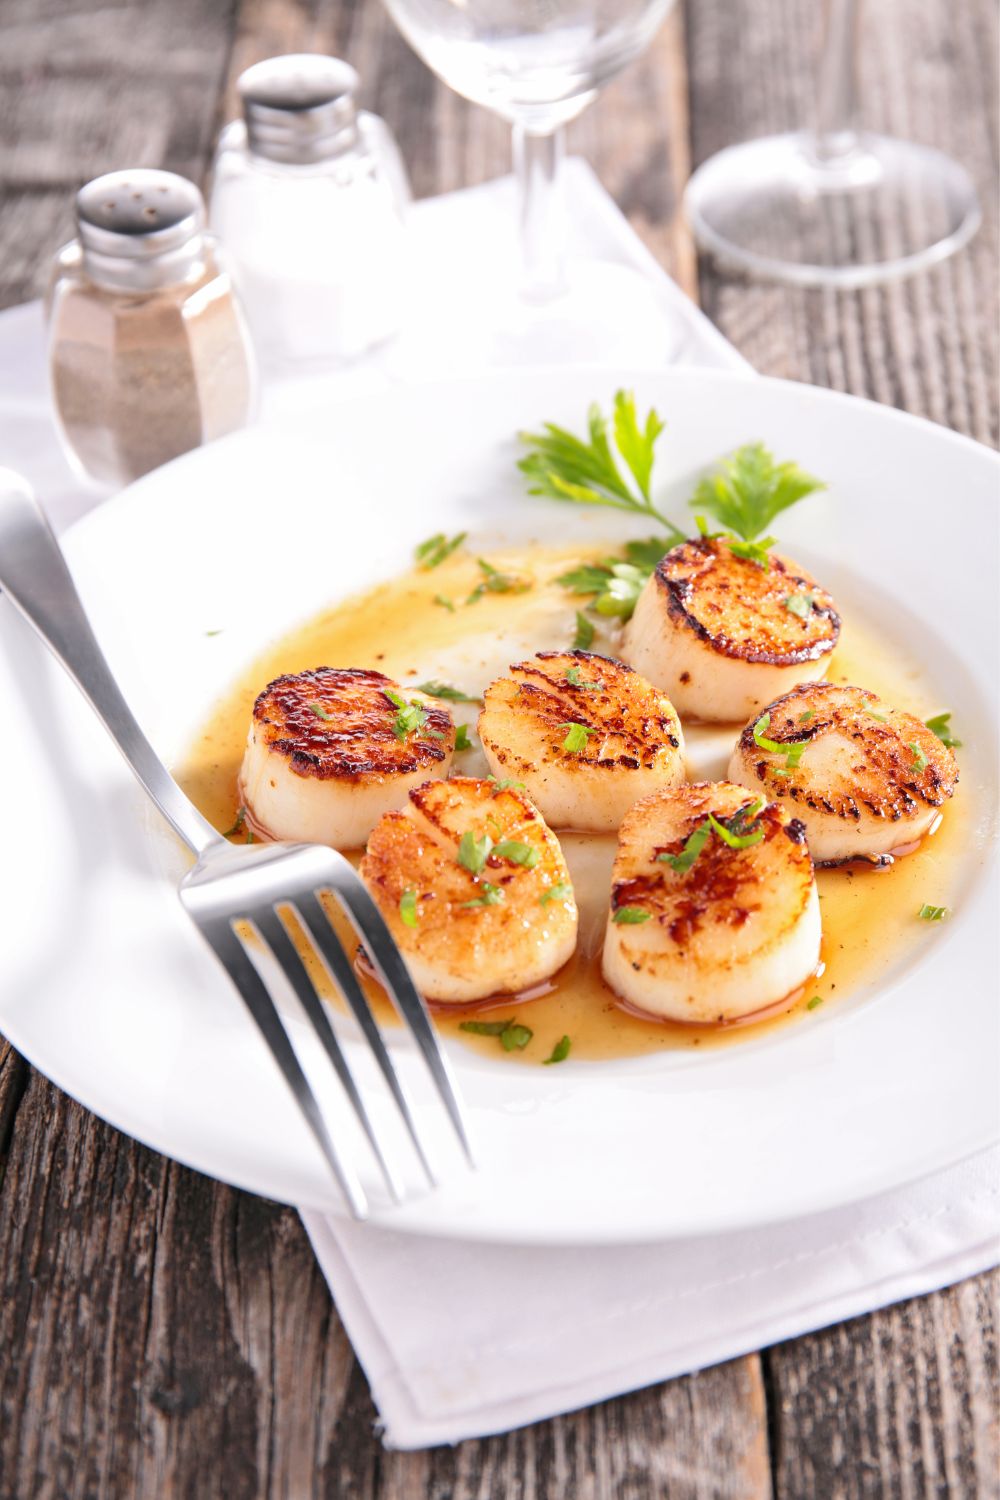 24 Side Dish Ideas to Pair with Scallops